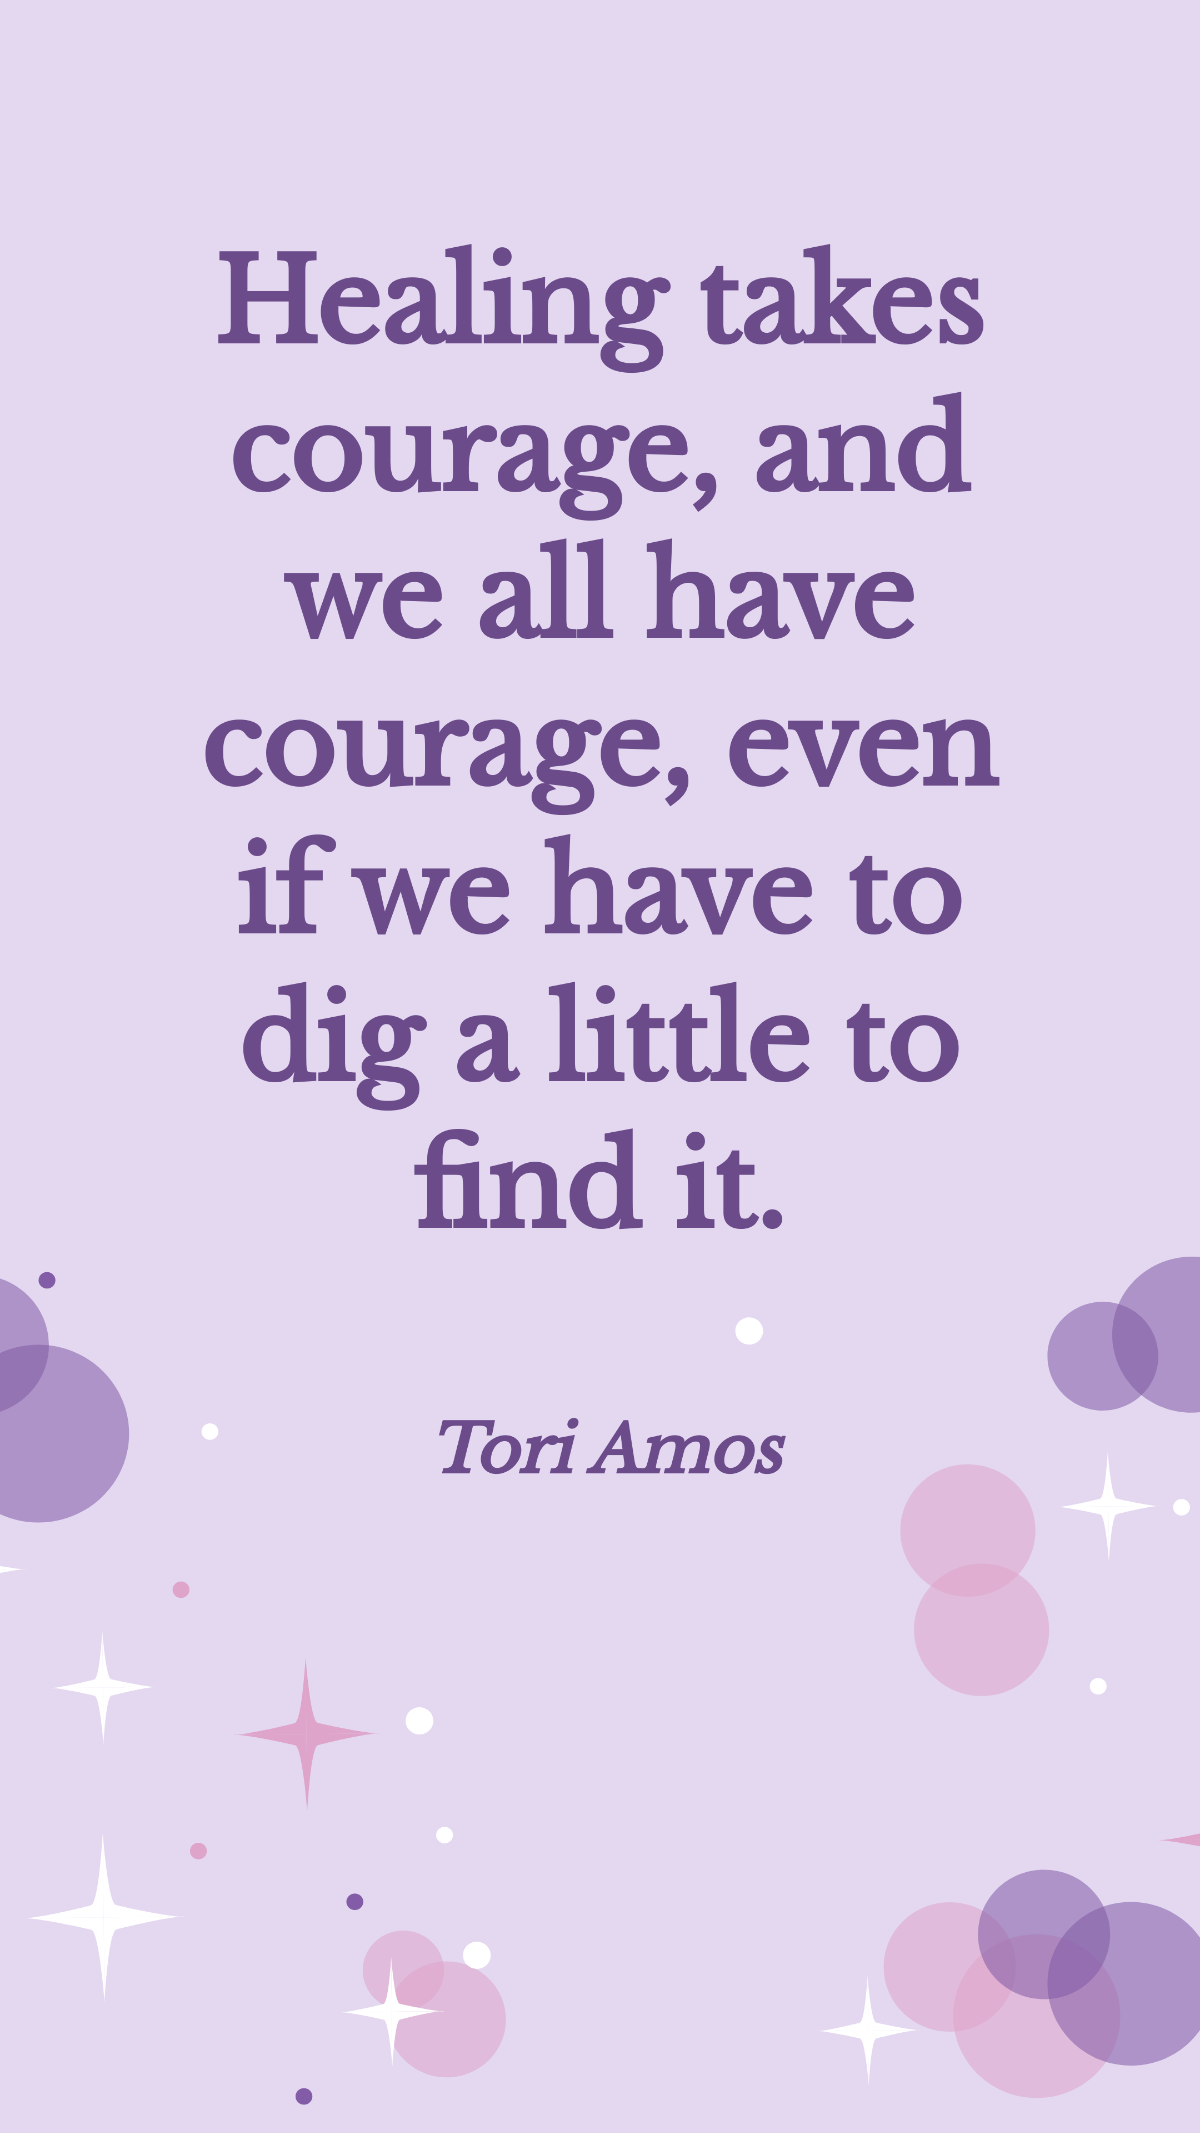 Tori Amos - Healing takes courage, and we all have courage, even if we have to dig a little to find it.